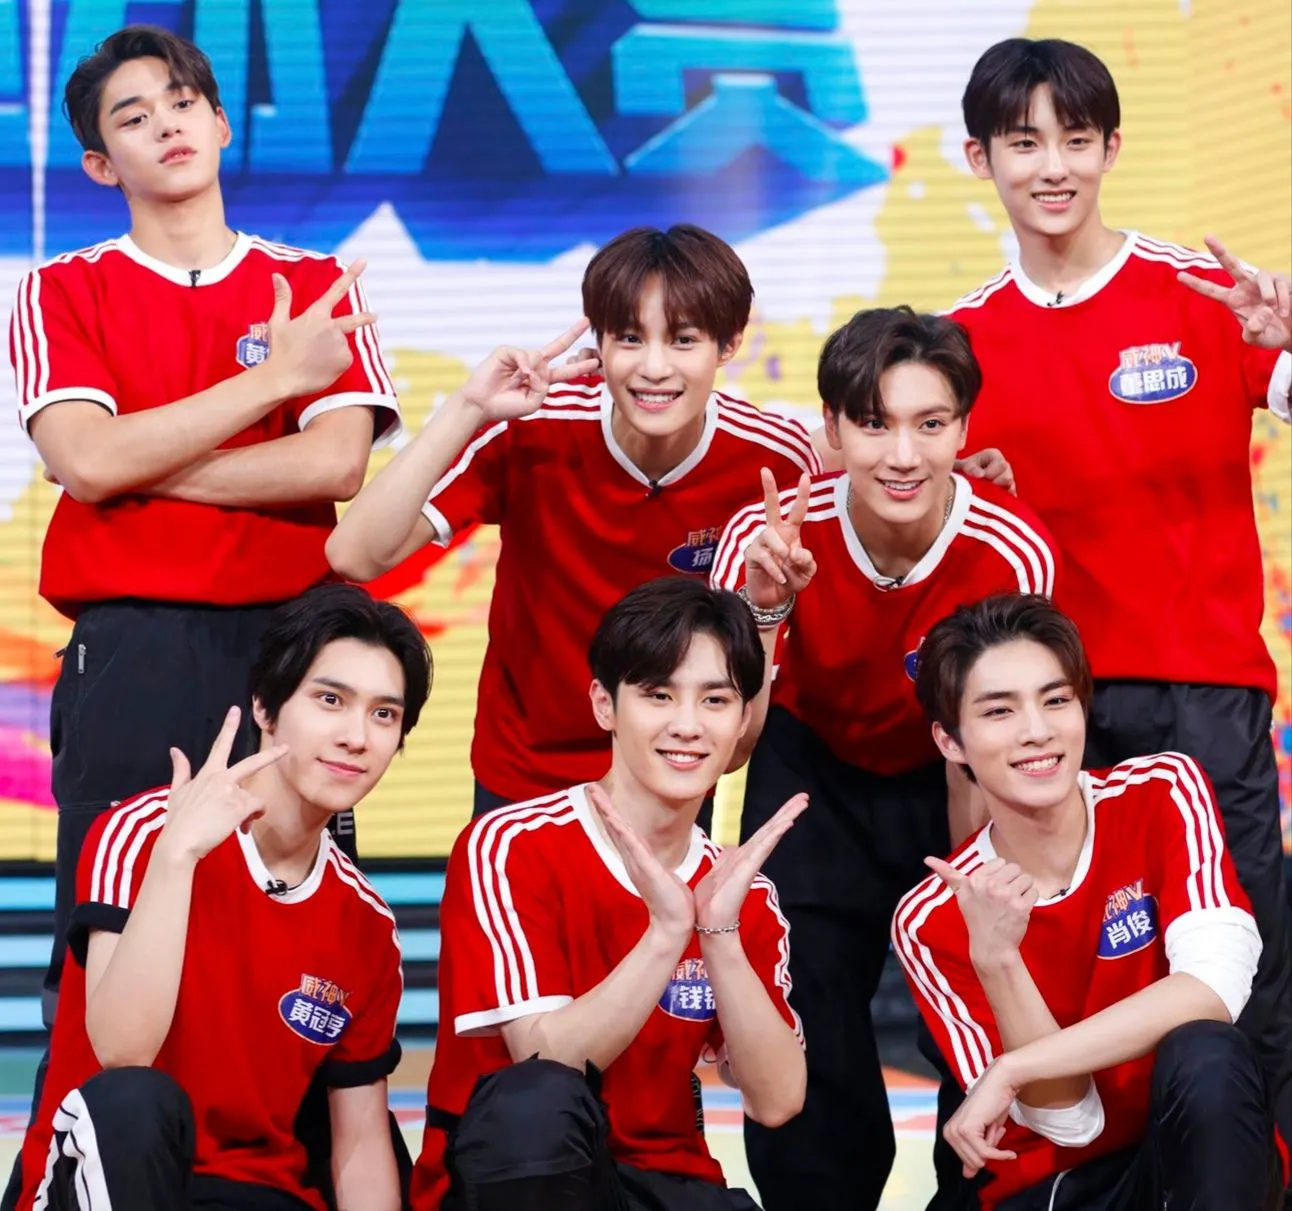 190622 | WayV recording for 'Day Day Up' Show | kpopping